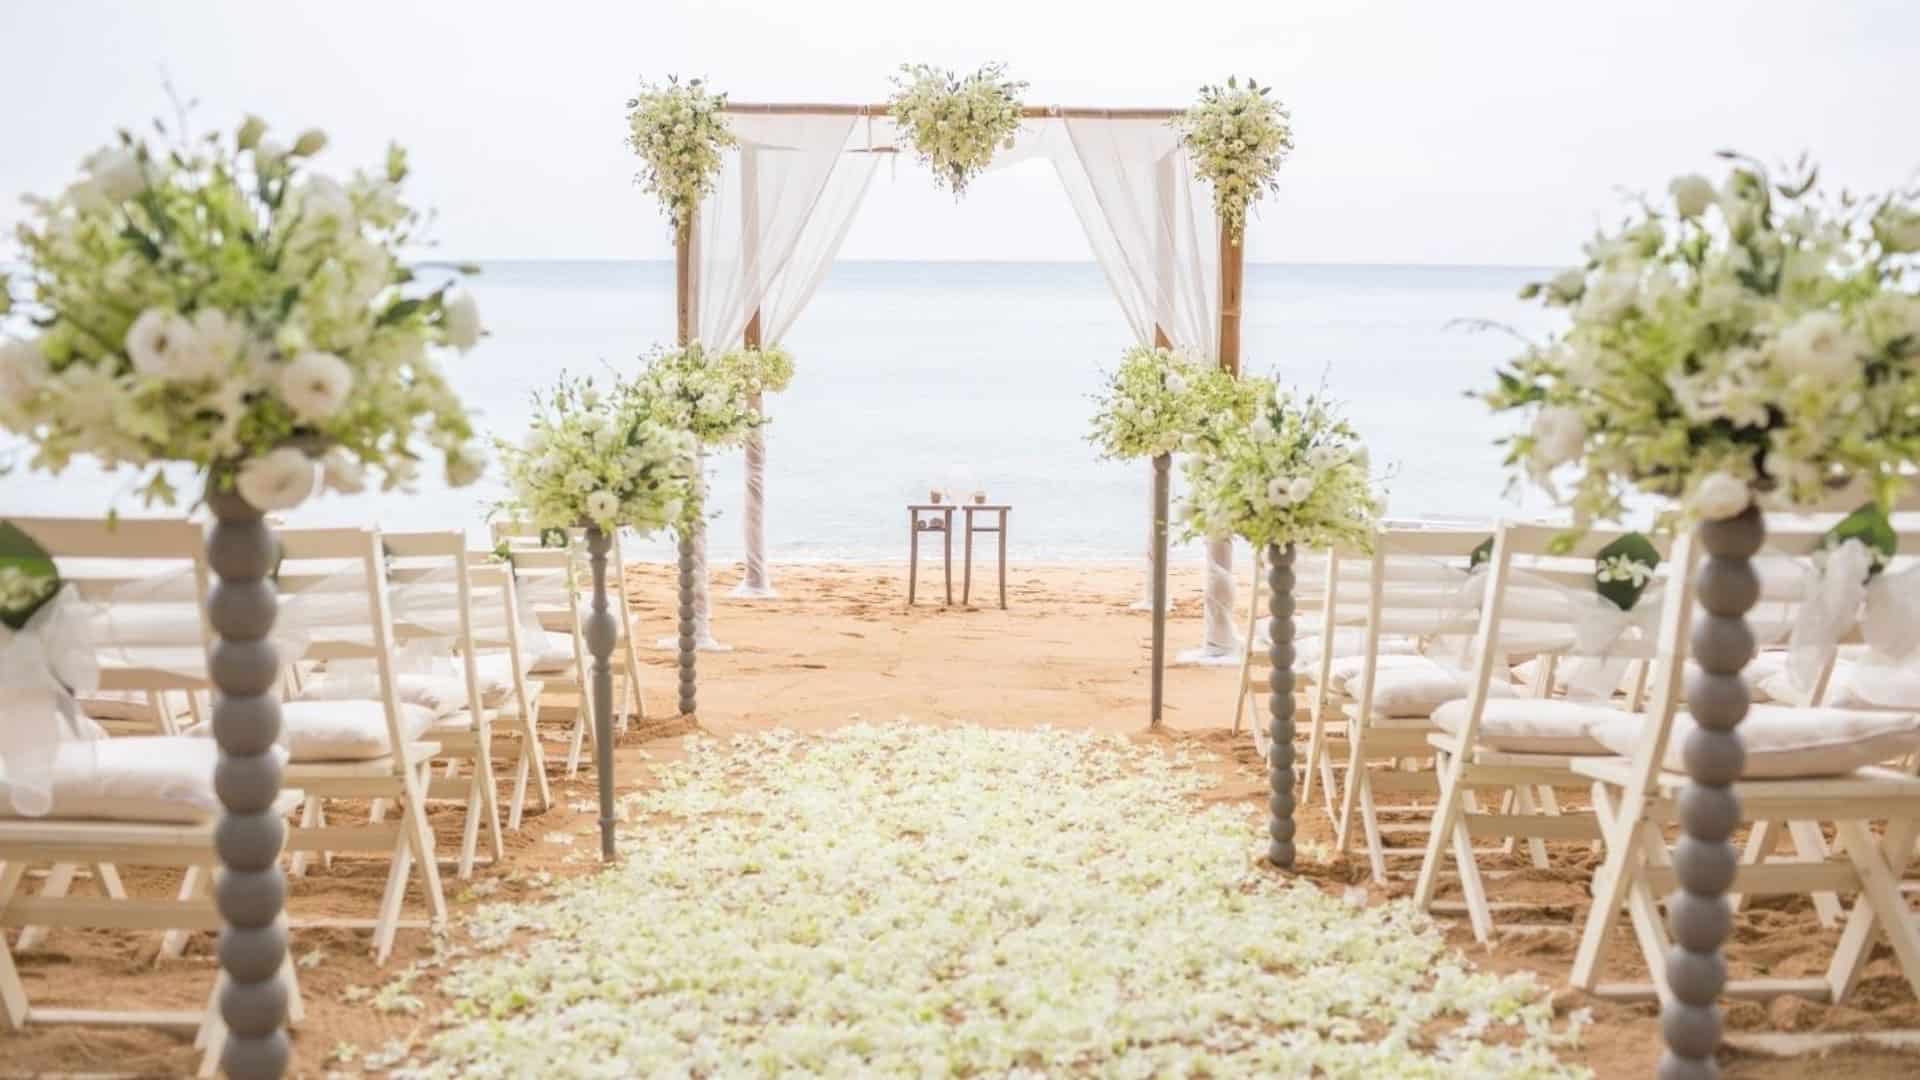 Beach wedding set up with chairs, flowers, petals in the aisle, and a floral decorated canopy at the water’s edge